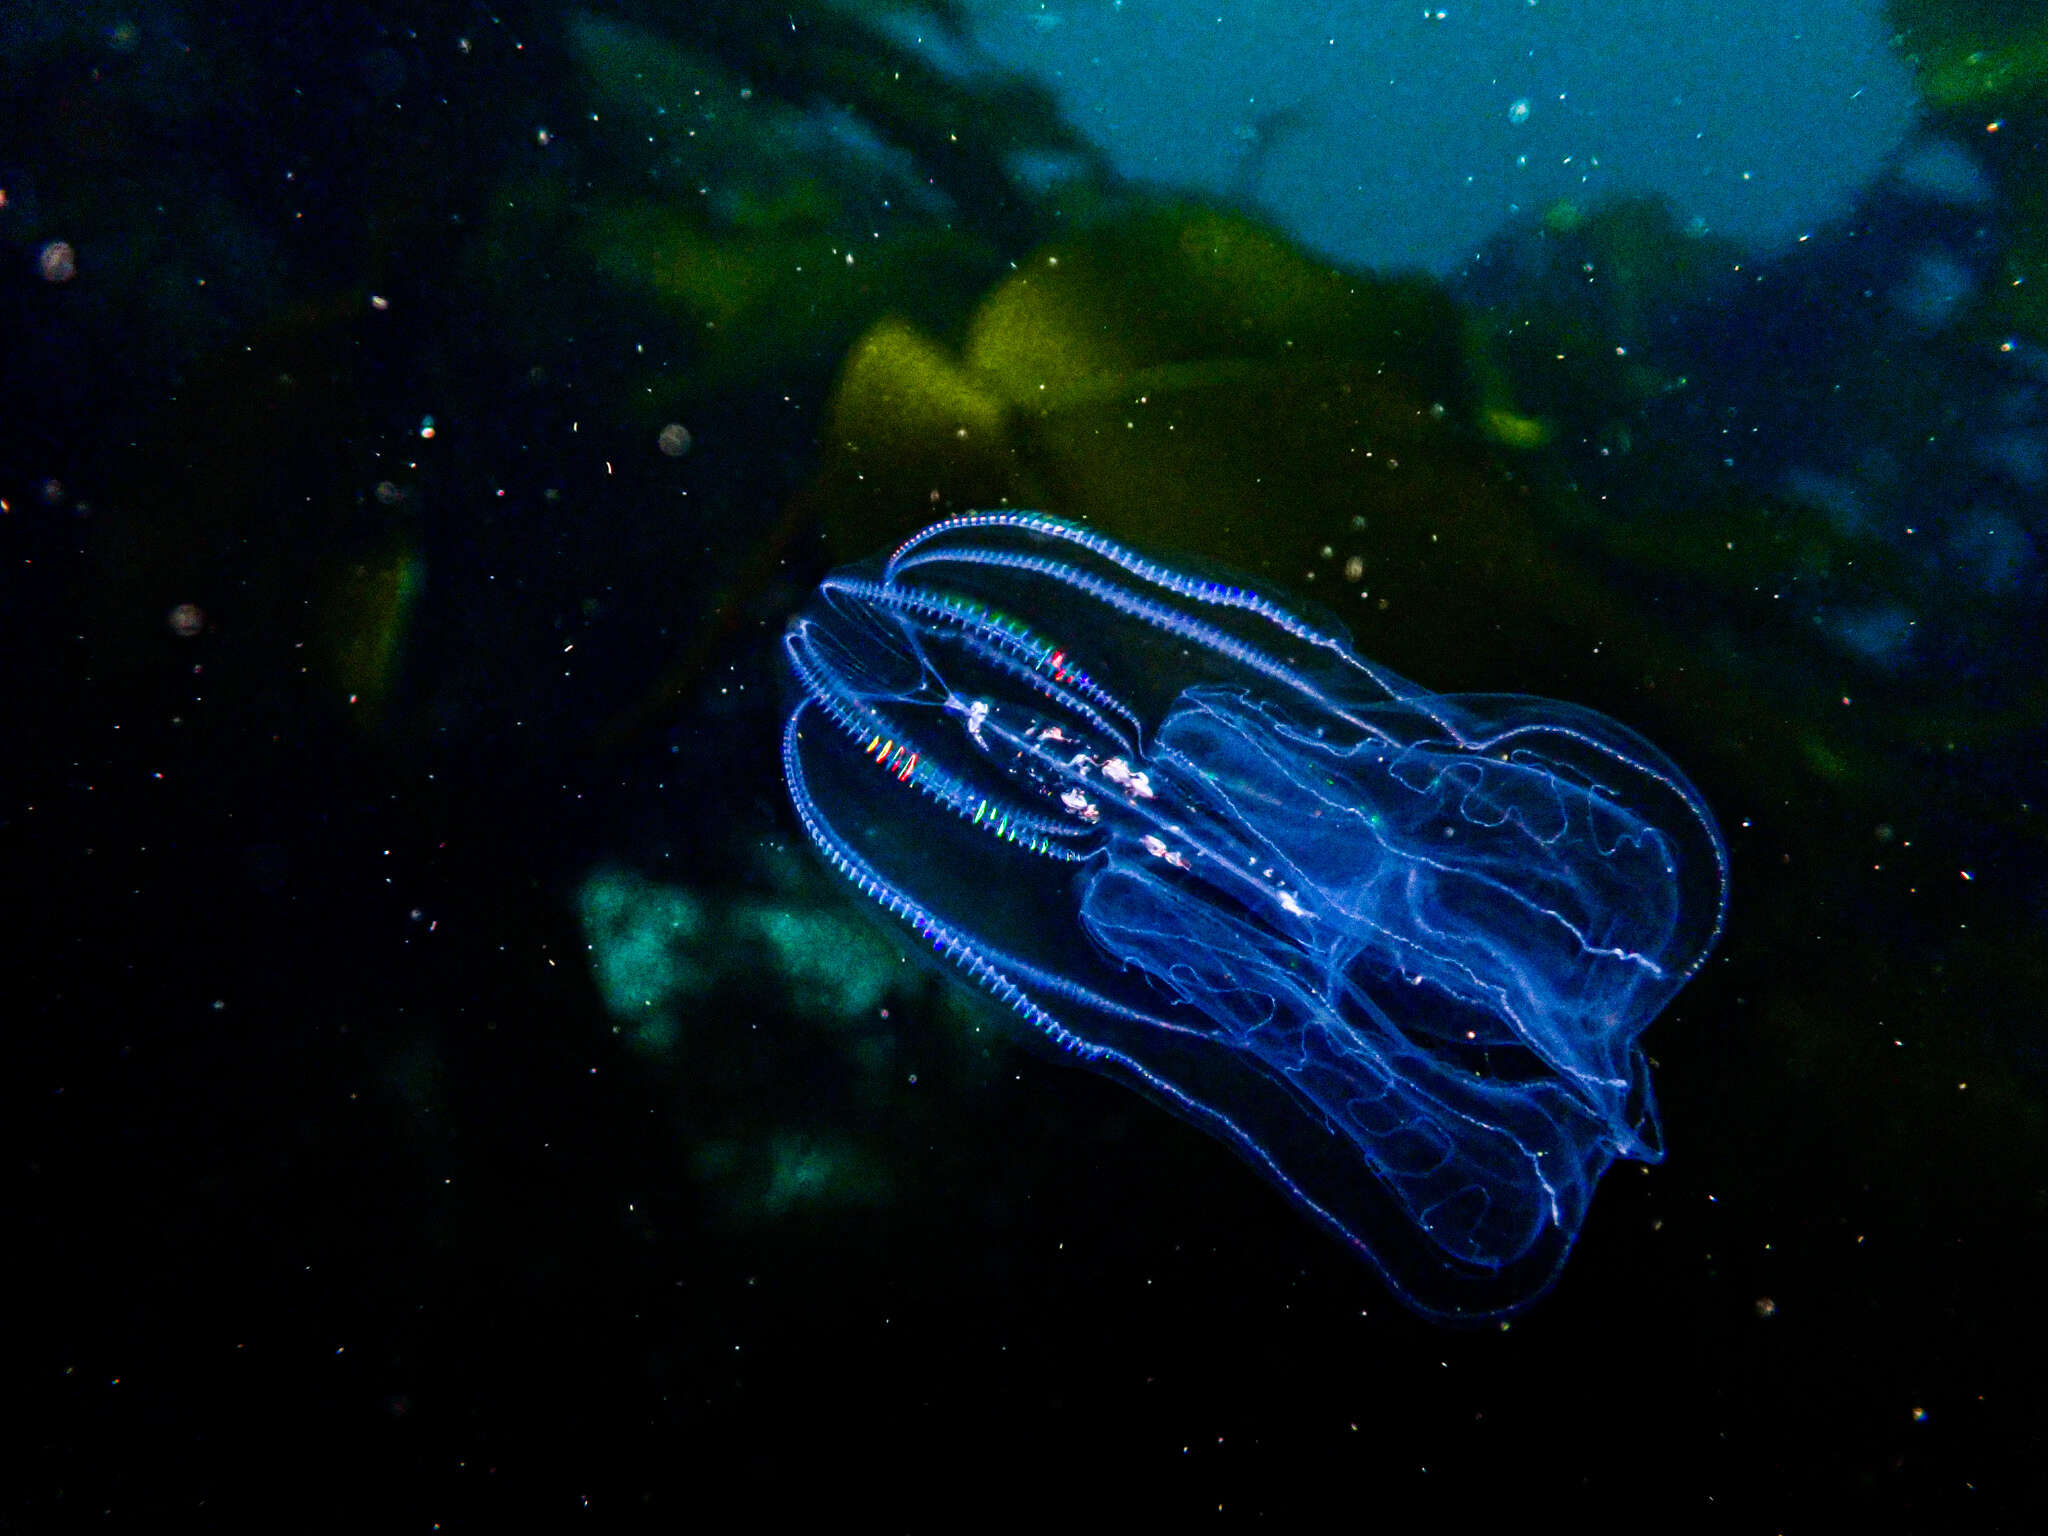 Image of common northern comb jelly